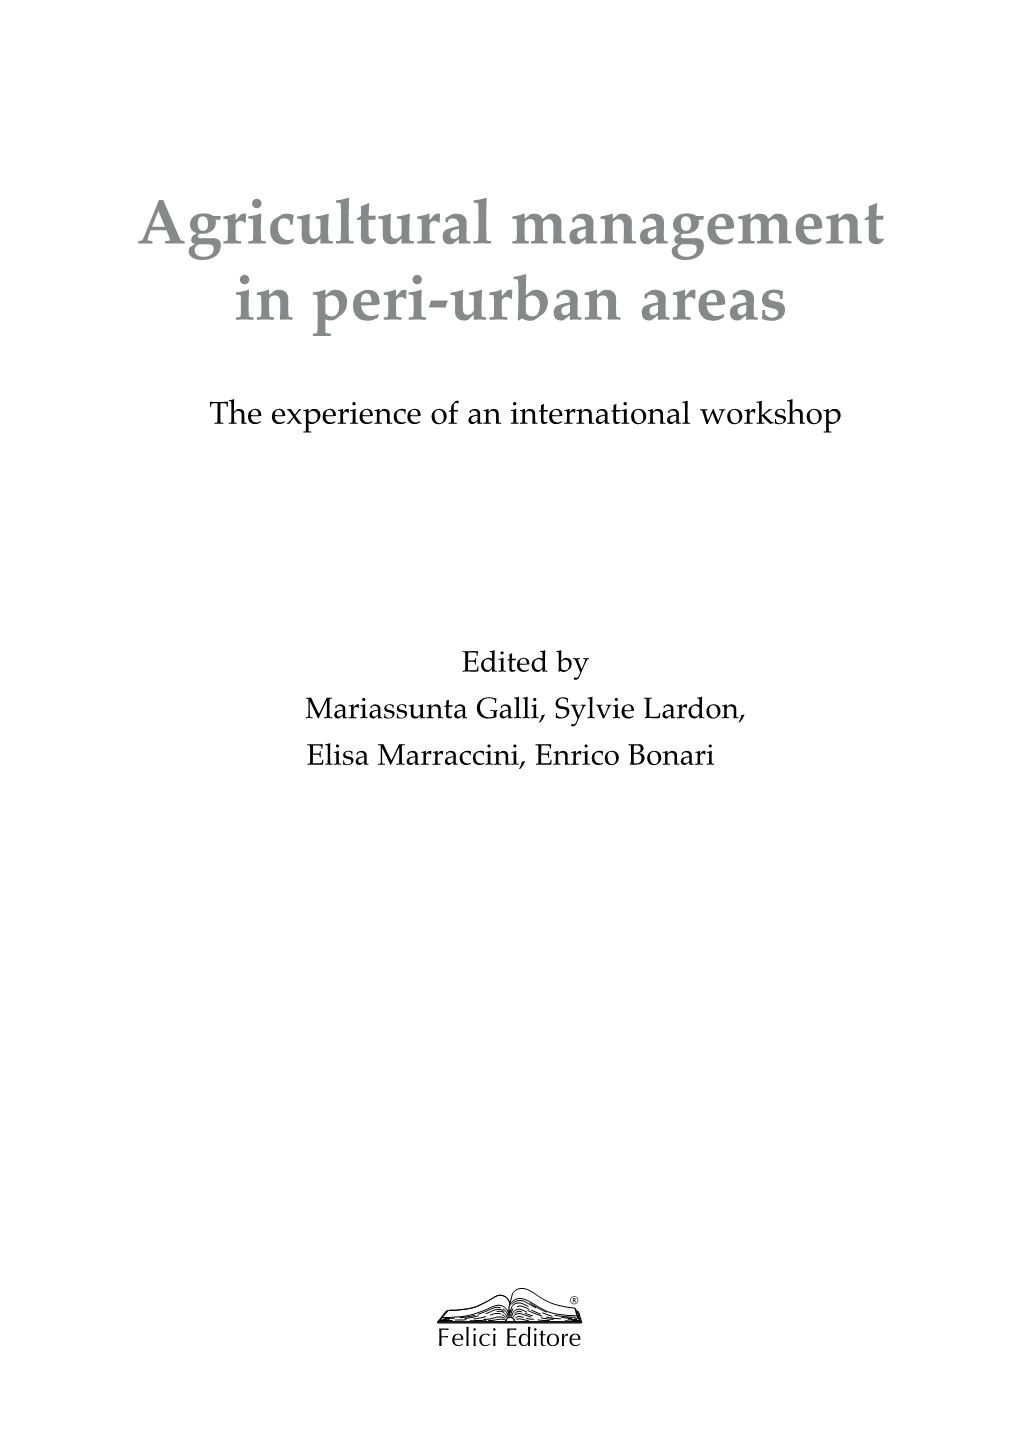 Agricultural Management in Peri-Urban Areas